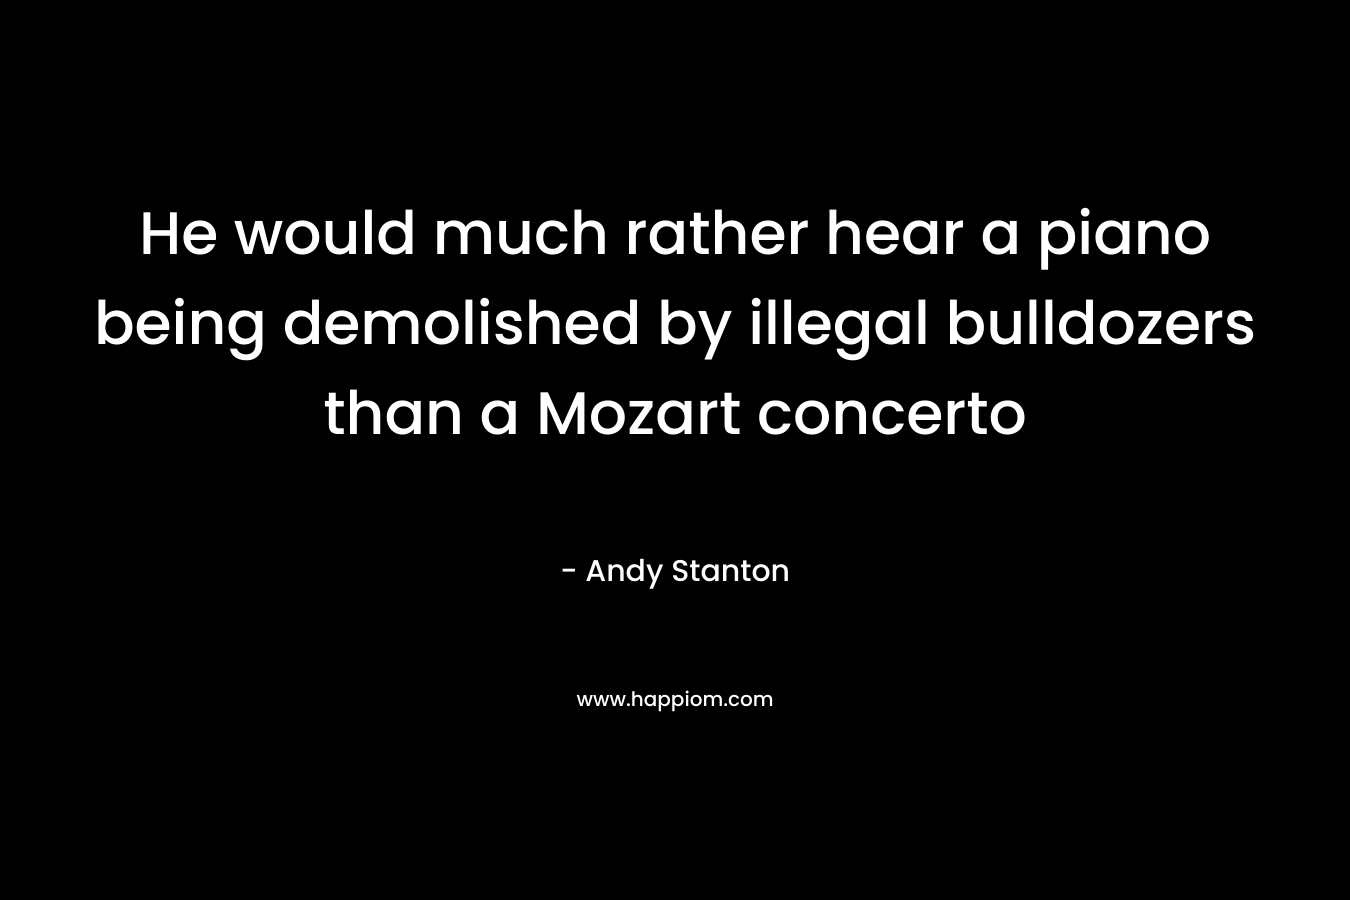 He would much rather hear a piano being demolished by illegal bulldozers than a Mozart concerto